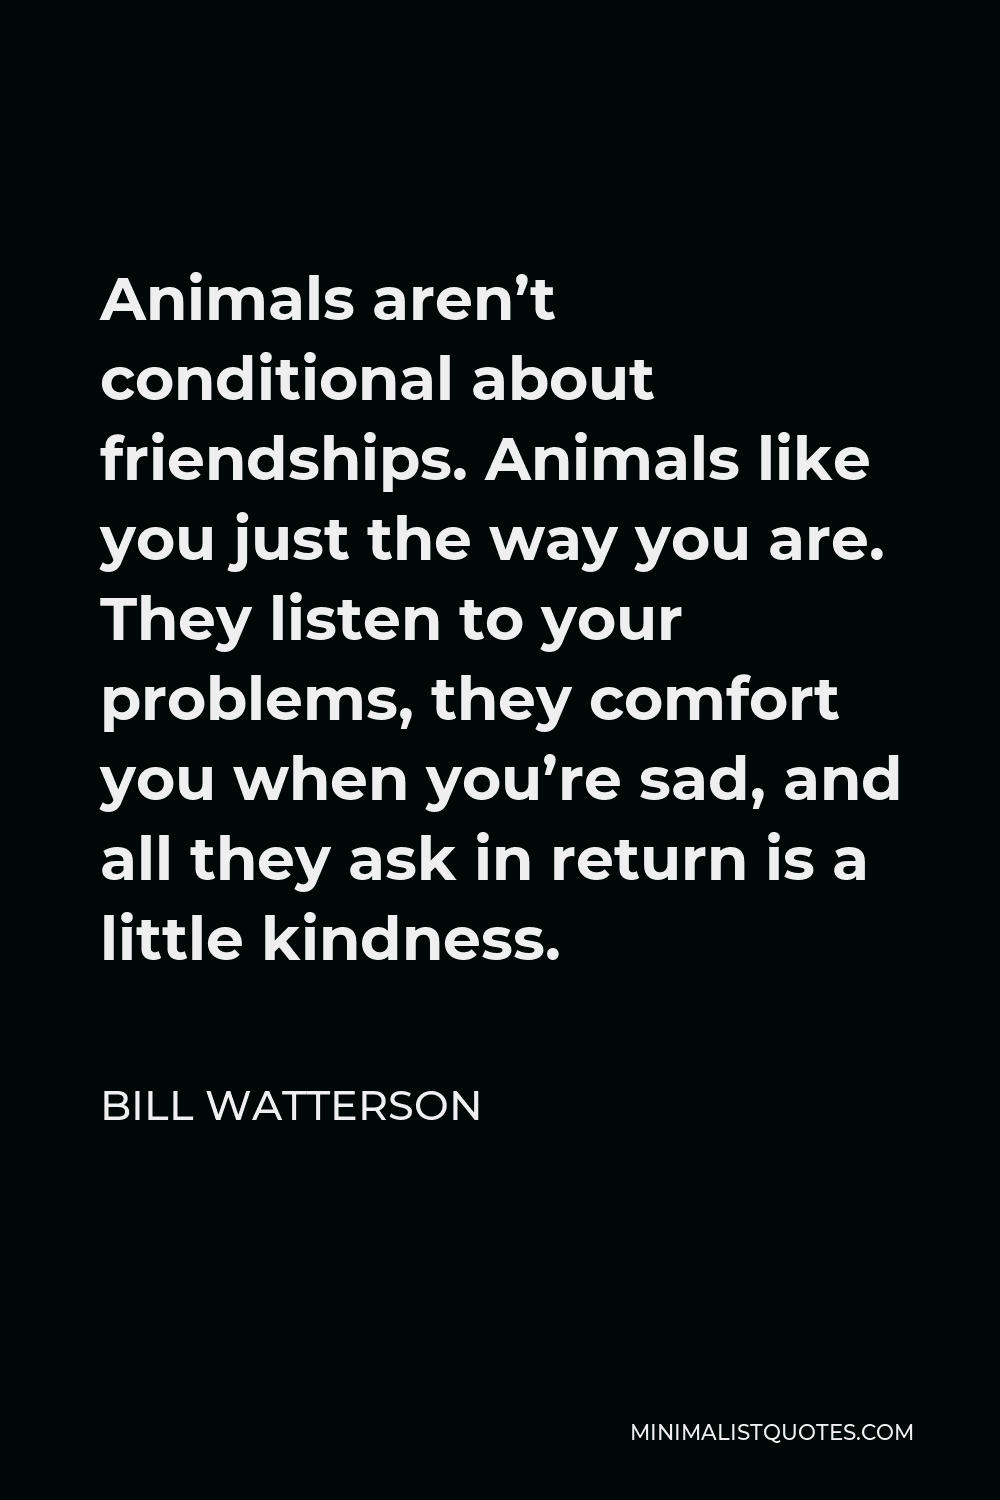 Bill Watterson Quote - Animals aren’t conditional about friendships. Animals like you just the way you are. They listen to your problems, they comfort you when you’re sad, and all they ask in return is a little kindness.